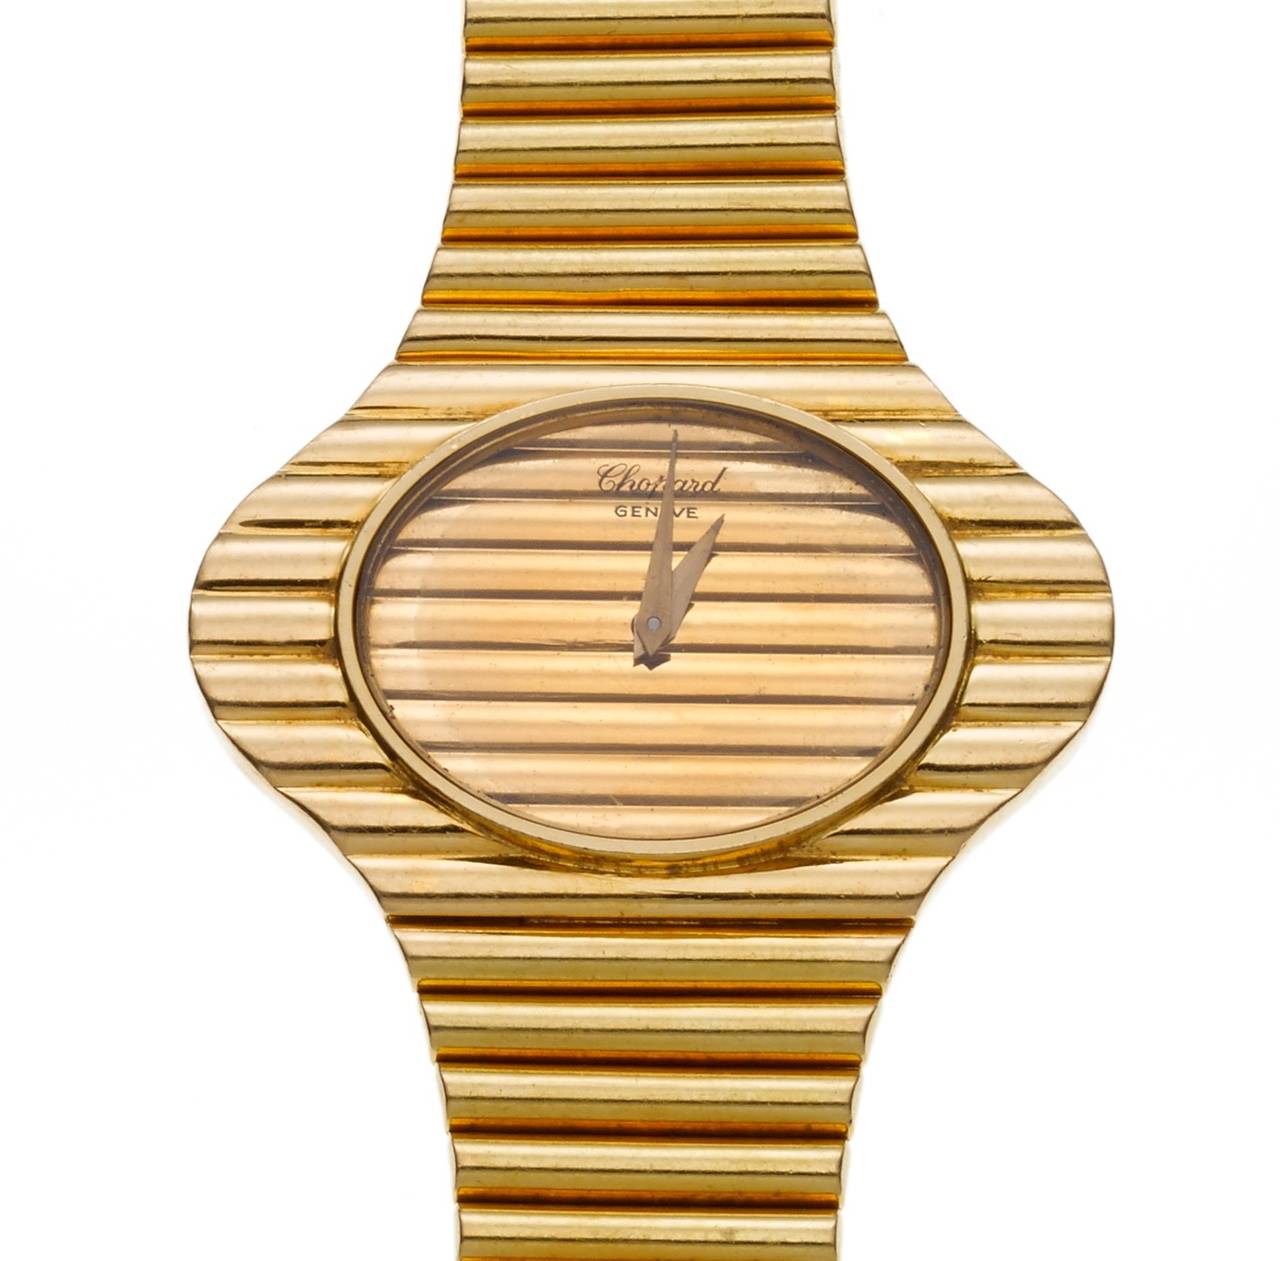 Chopard lady's 18K yellow gold bracelet watch from the 1970s, with oval dial, approximately 1